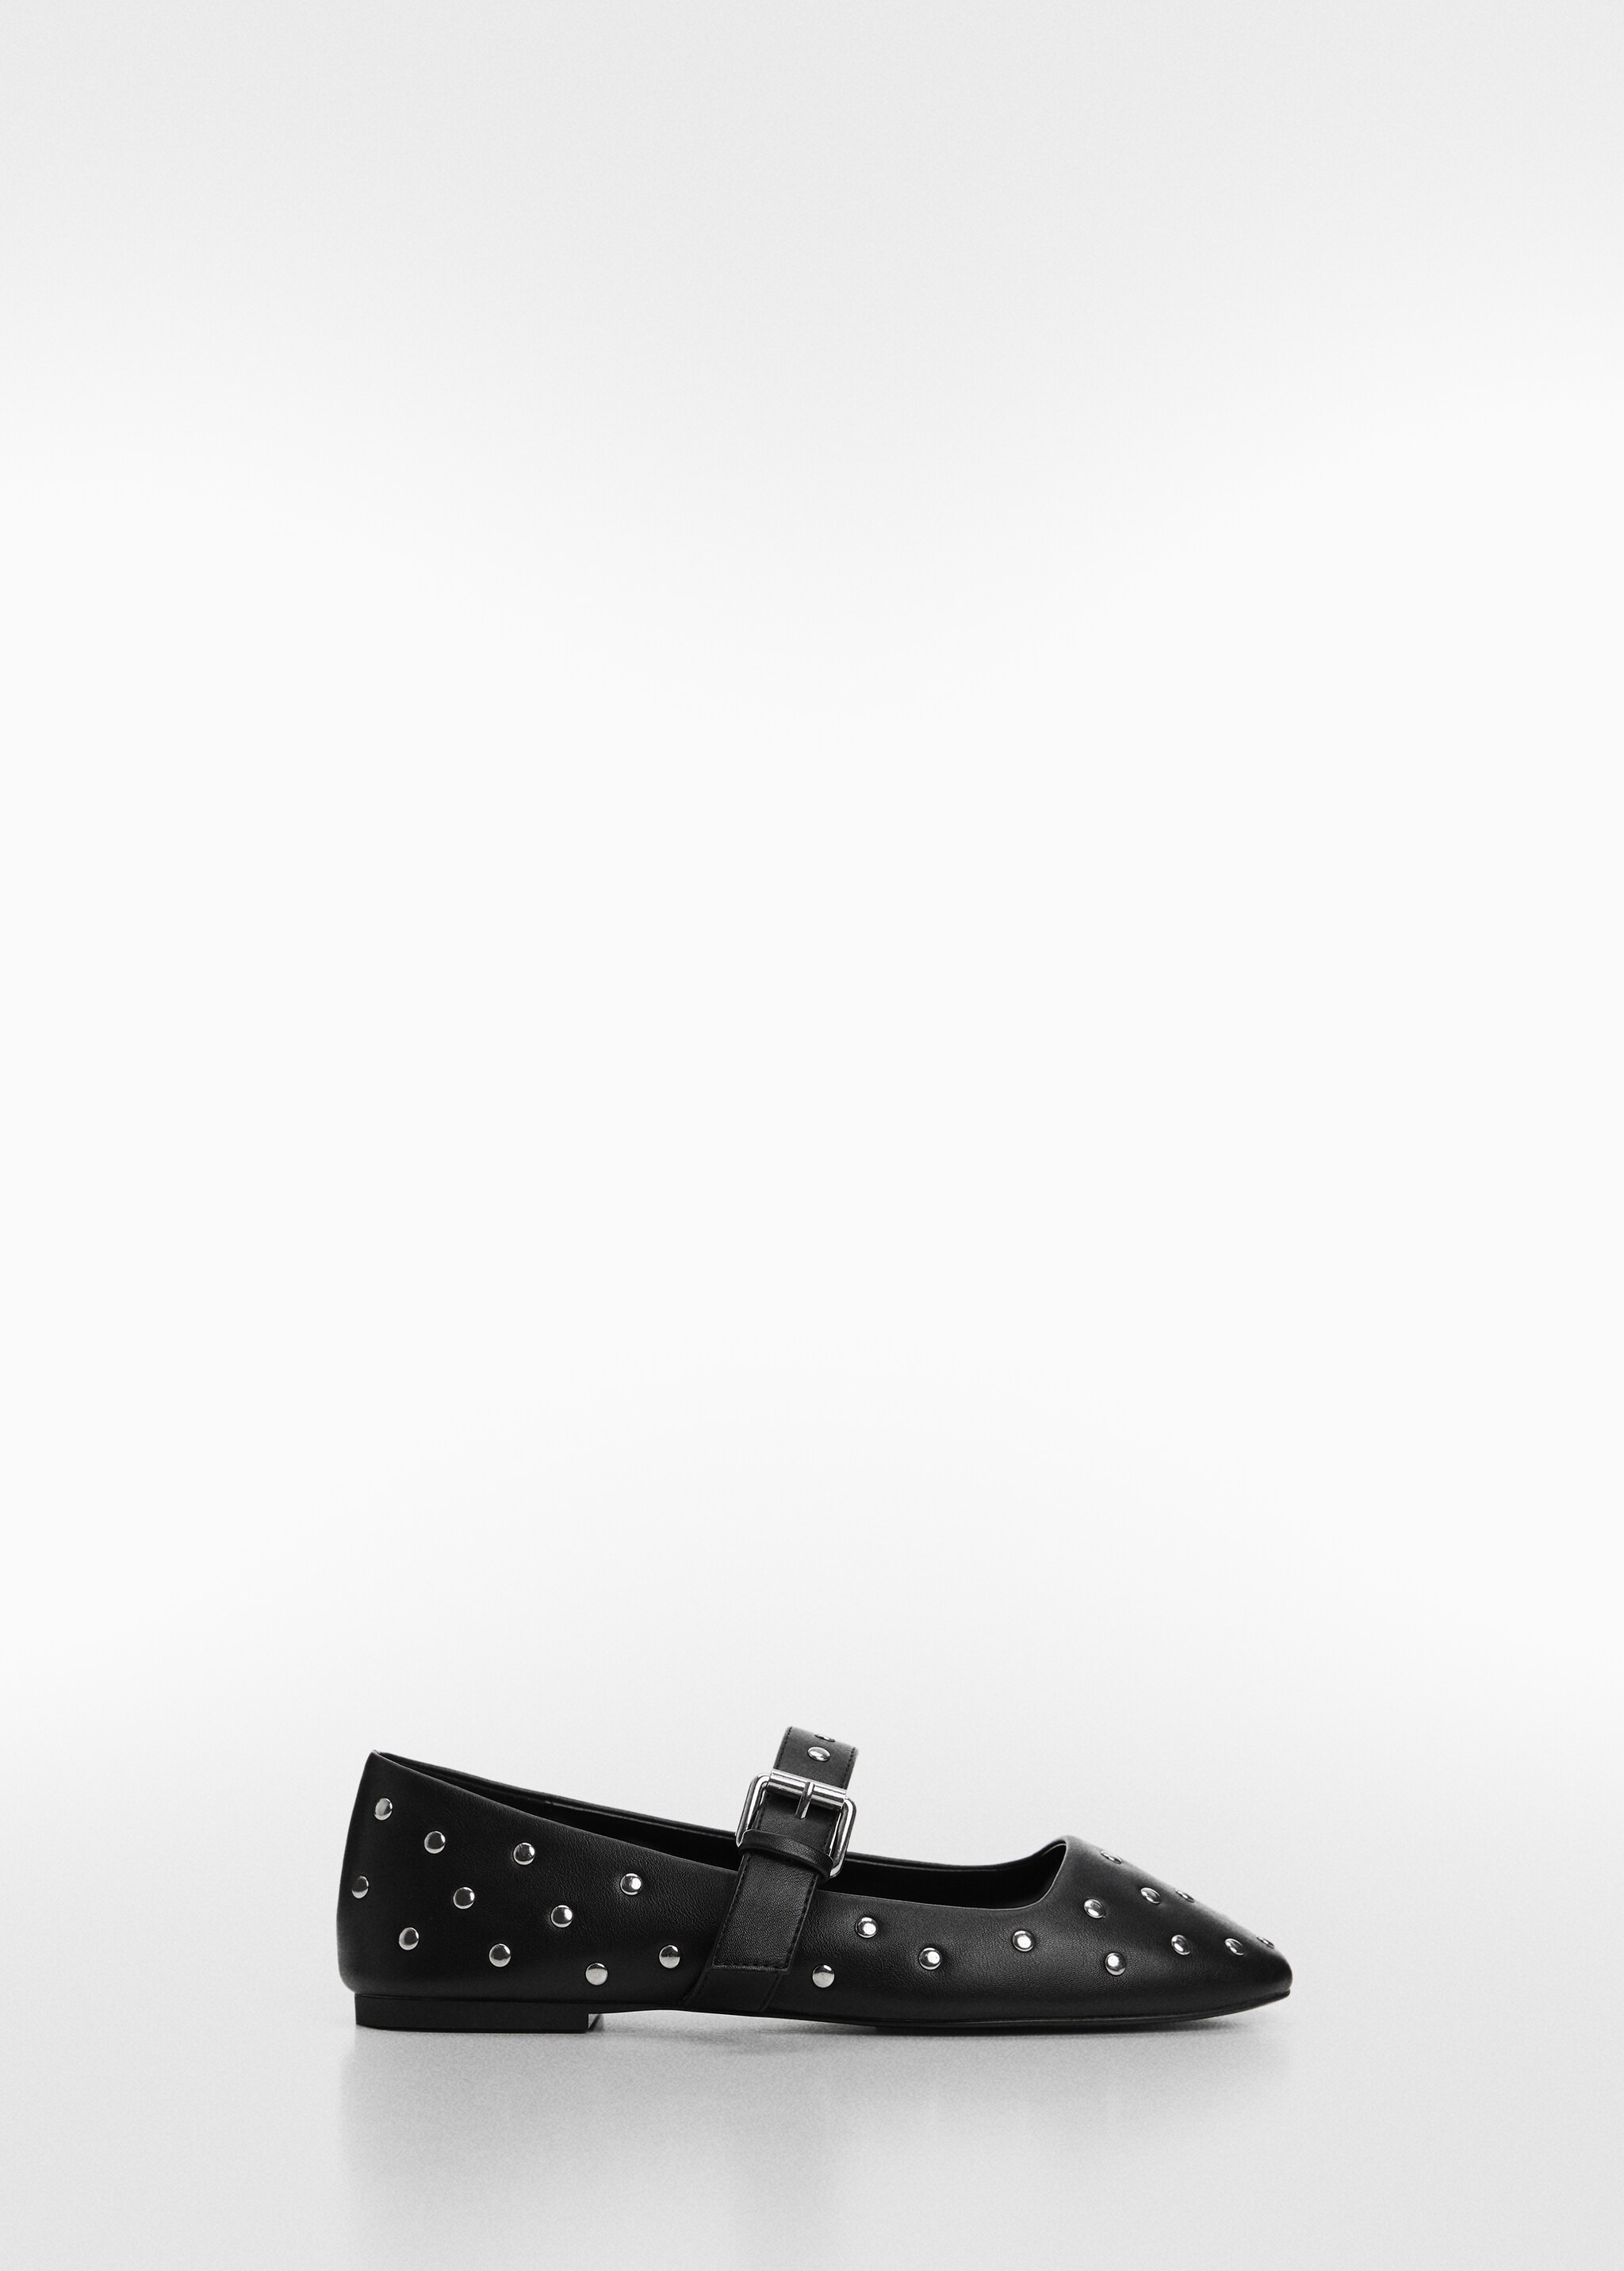 Studded ballerinas - Article without model